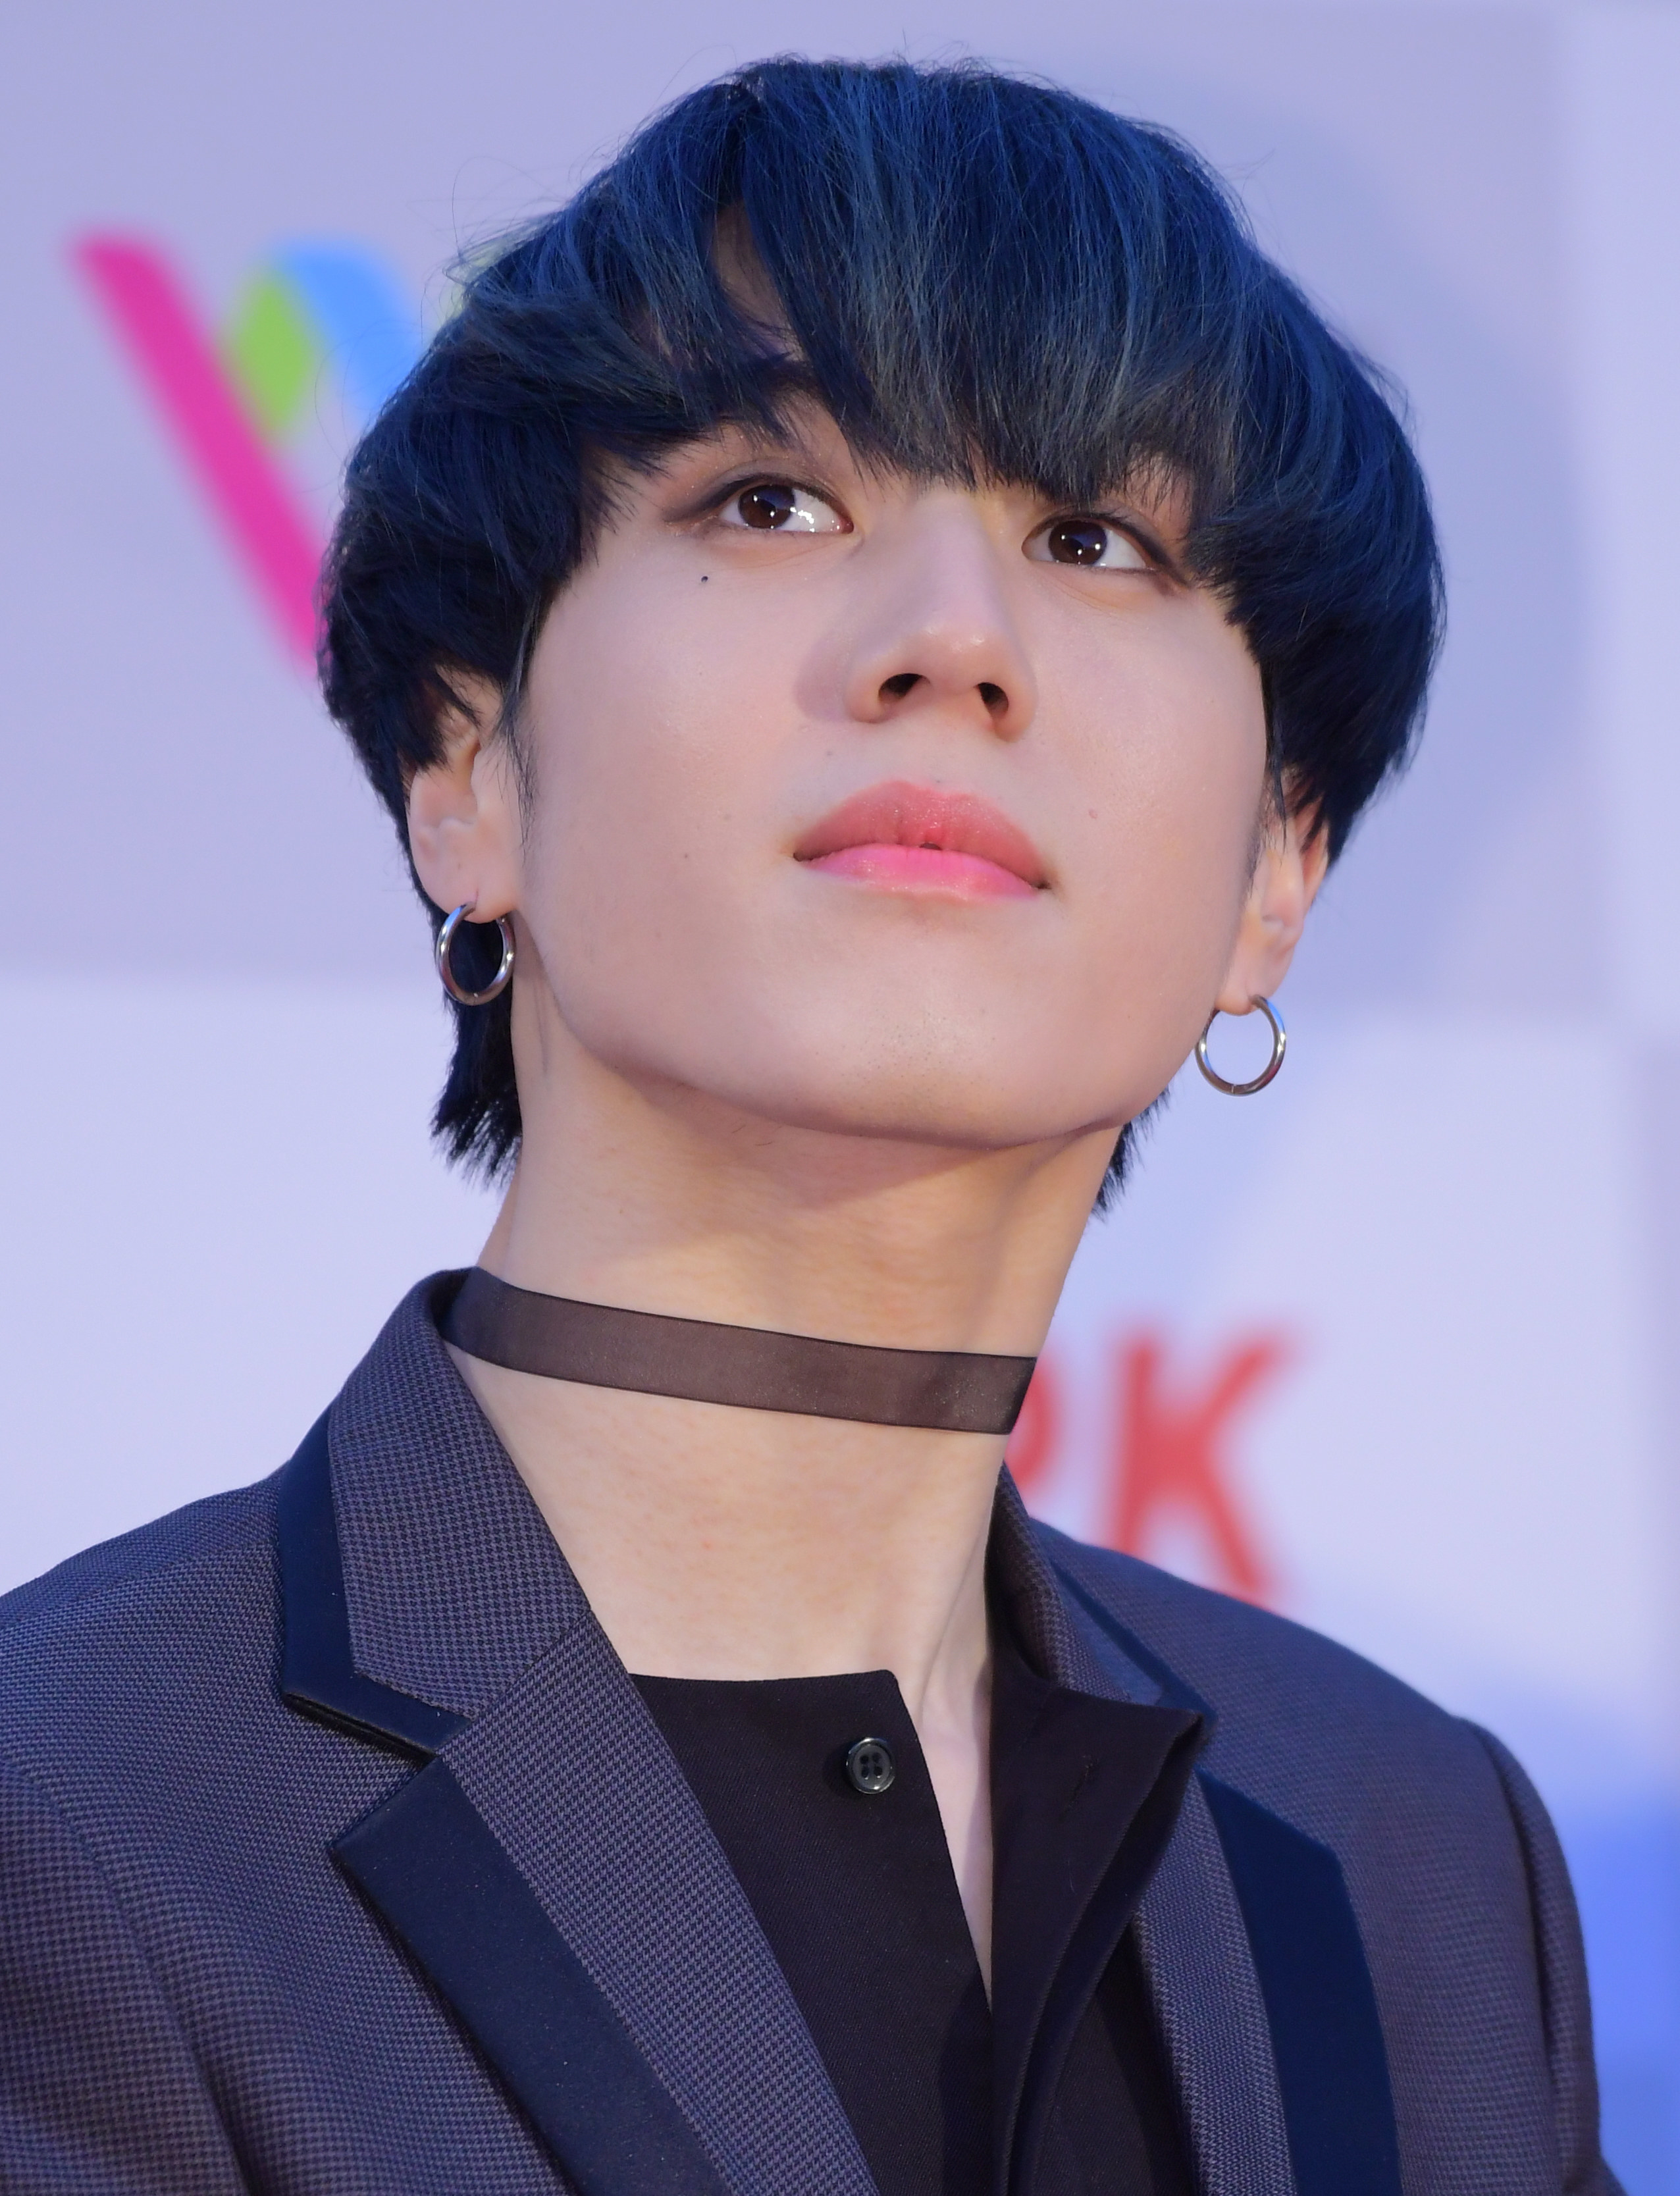 Yugyeom looking up